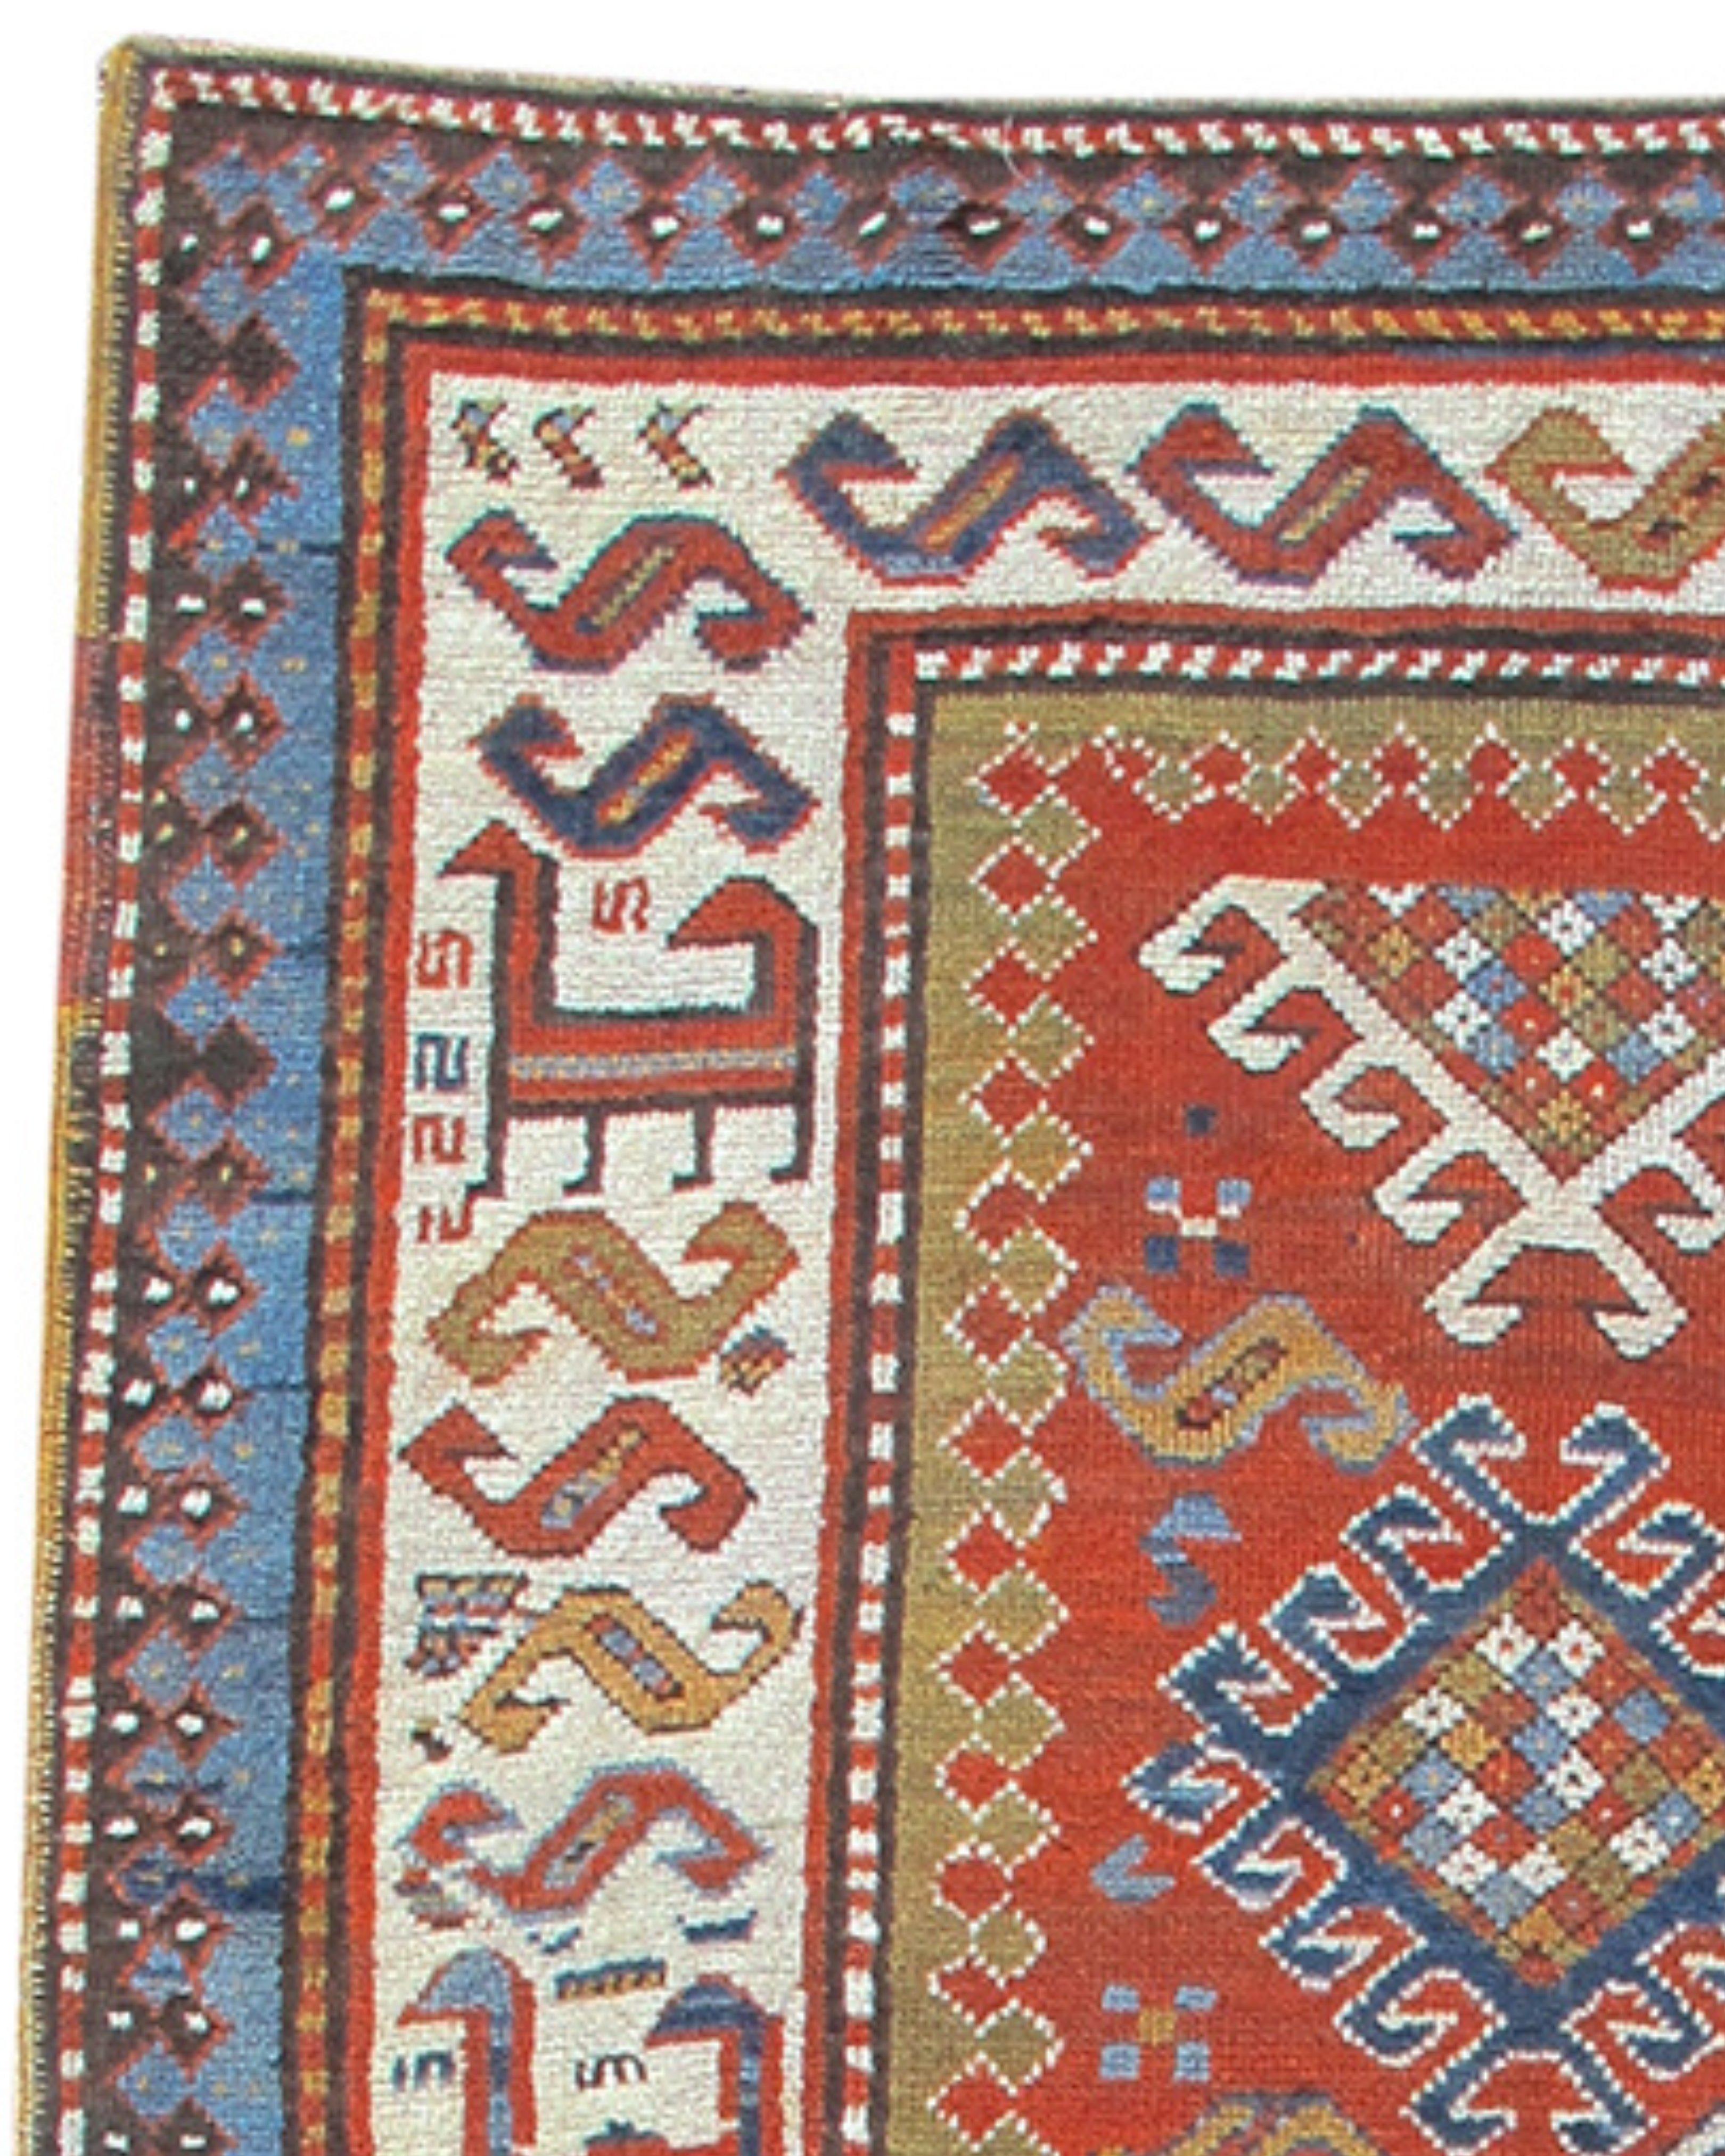 Antique Kazak Rug, Early 19th Century In Excellent Condition For Sale In San Francisco, CA